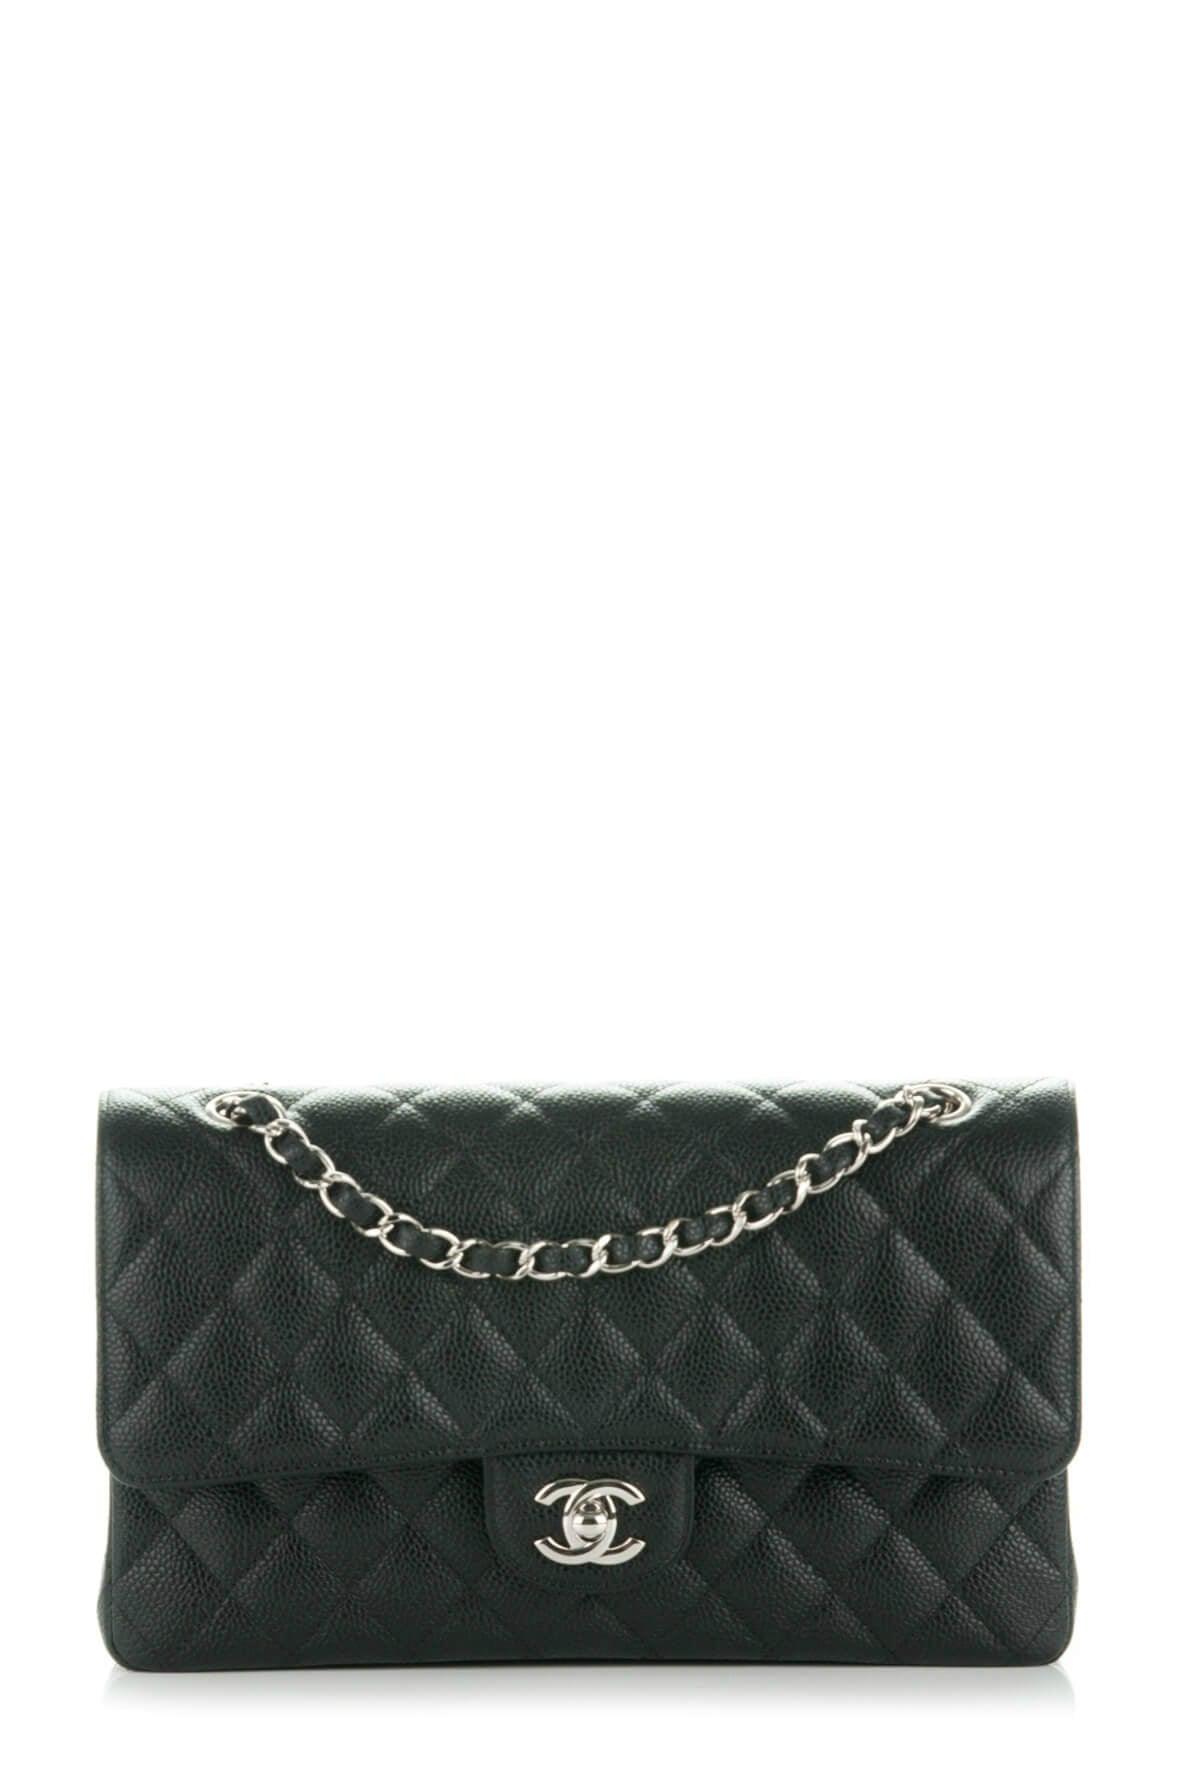 MEDIUM CLASSIC DOUBLE FLAP BLACK CAVIAR SILVER HARDWARE (SERIES 30) – THE  LUX THEORY